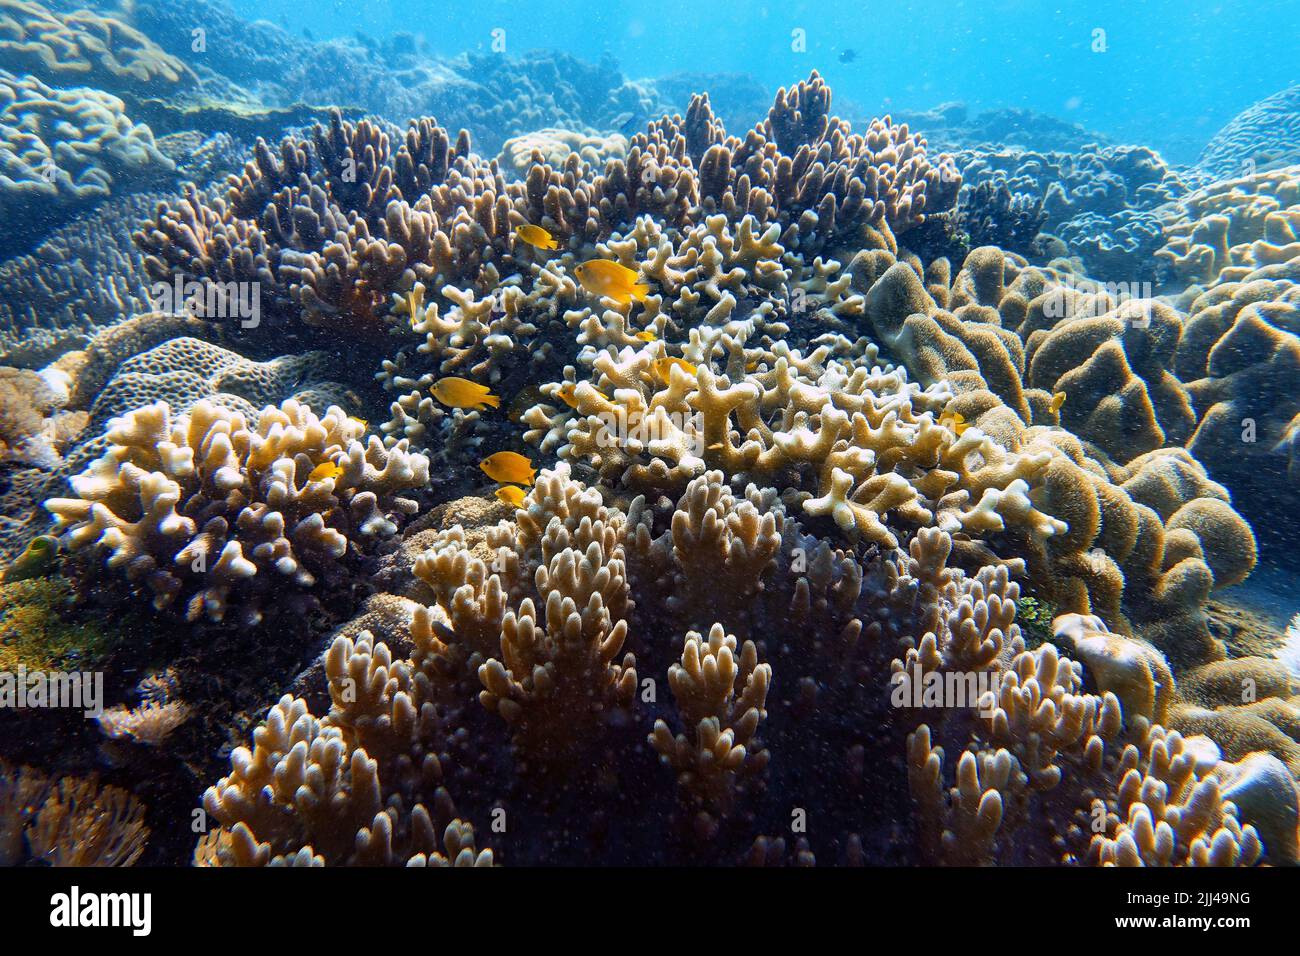 Indonesia Sumbawa - Colorful coral reef with fish Stock Photo